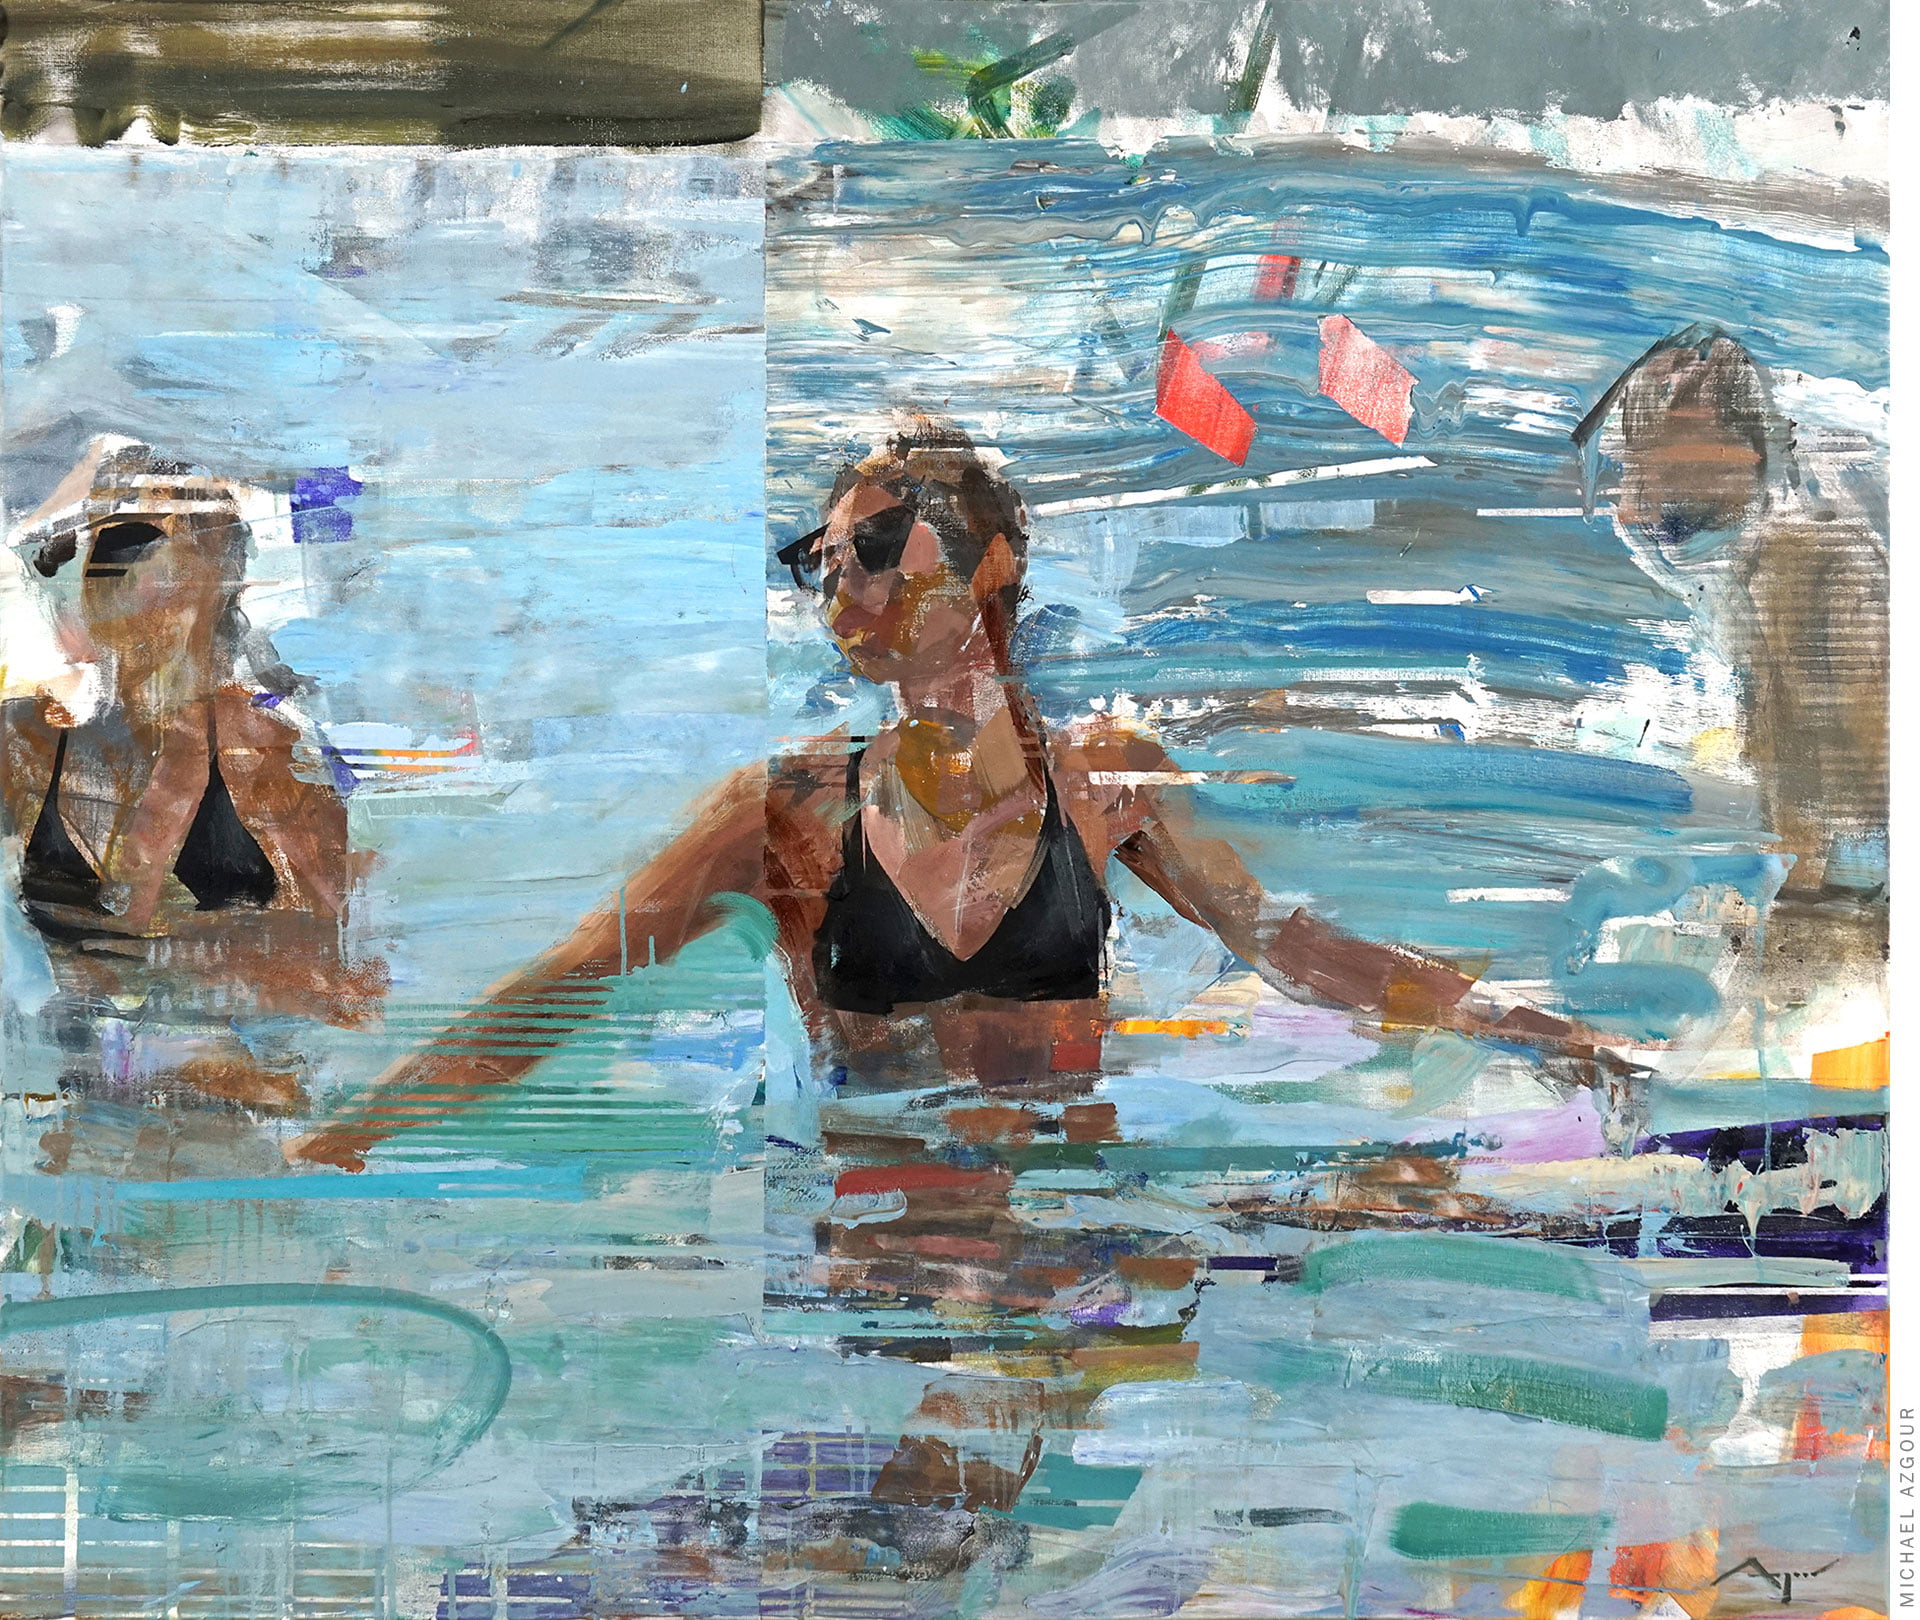 Original painting titled Kryspi depicting swimmers and women in a bikini in the ocean. Contemporary artwork by artist Michael Azgour.